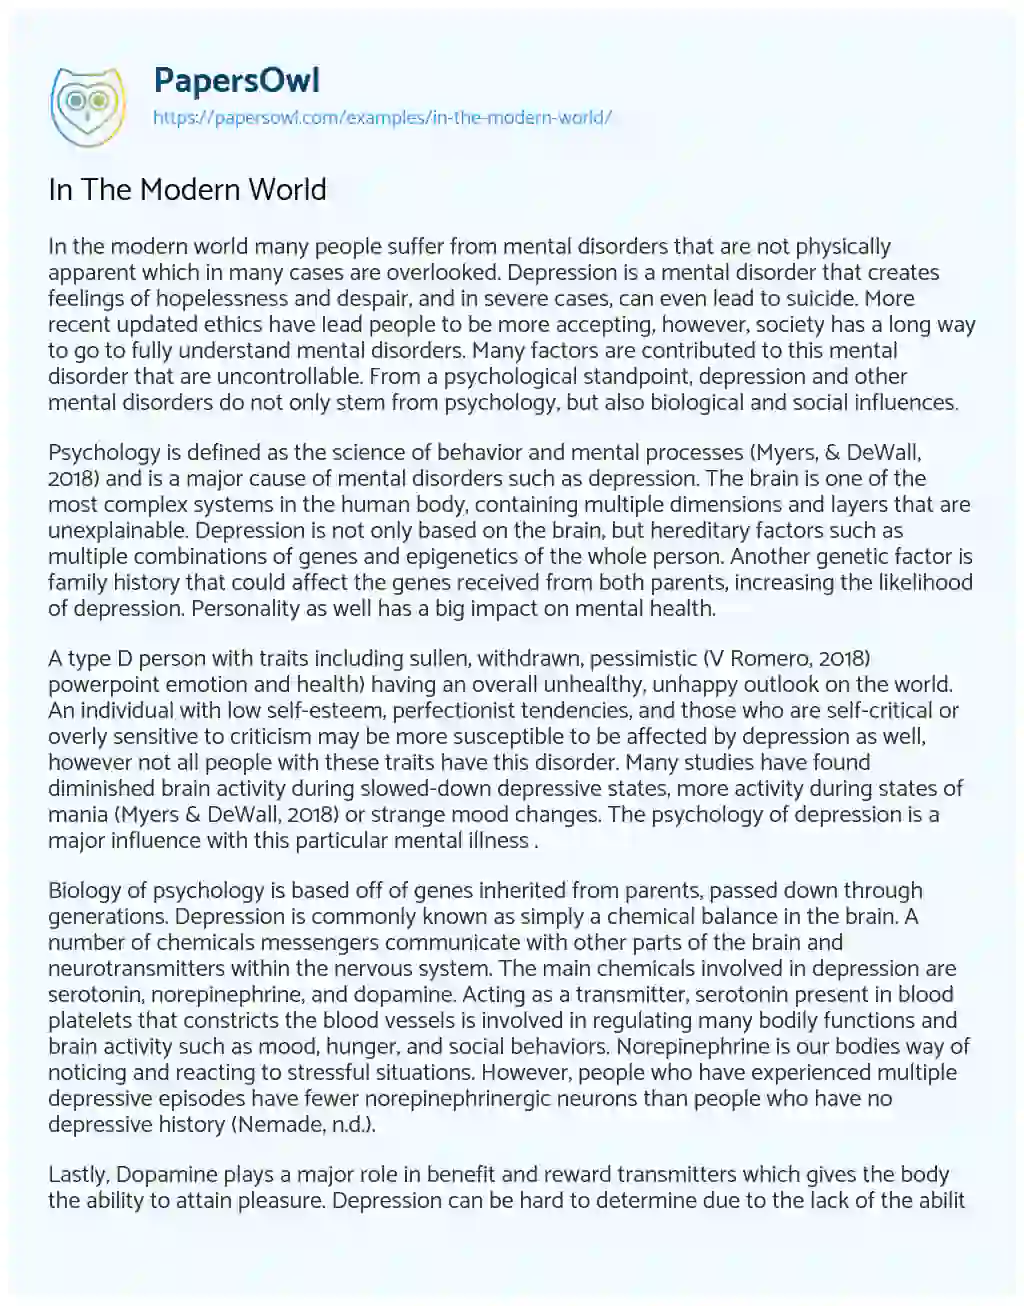 Essay on In the Modern World